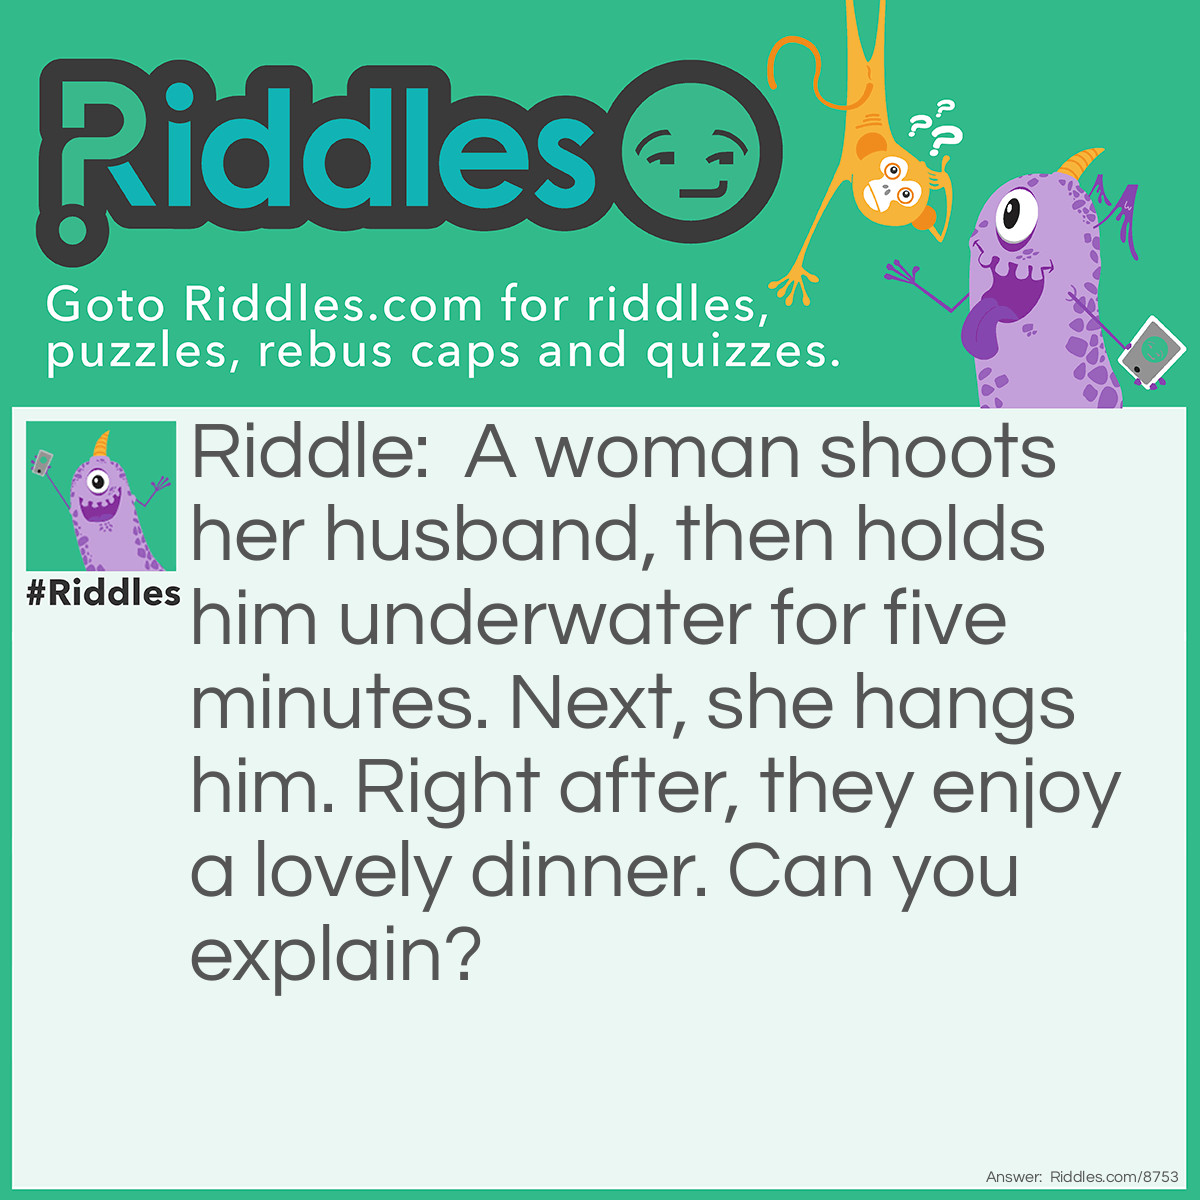 Riddle: A woman shoots her husband, then holds him underwater for five minutes. Next, she hangs him. Right after, they enjoy a lovely dinner. Can you explain? Answer: She took a picture of him and developed it in her dark room.